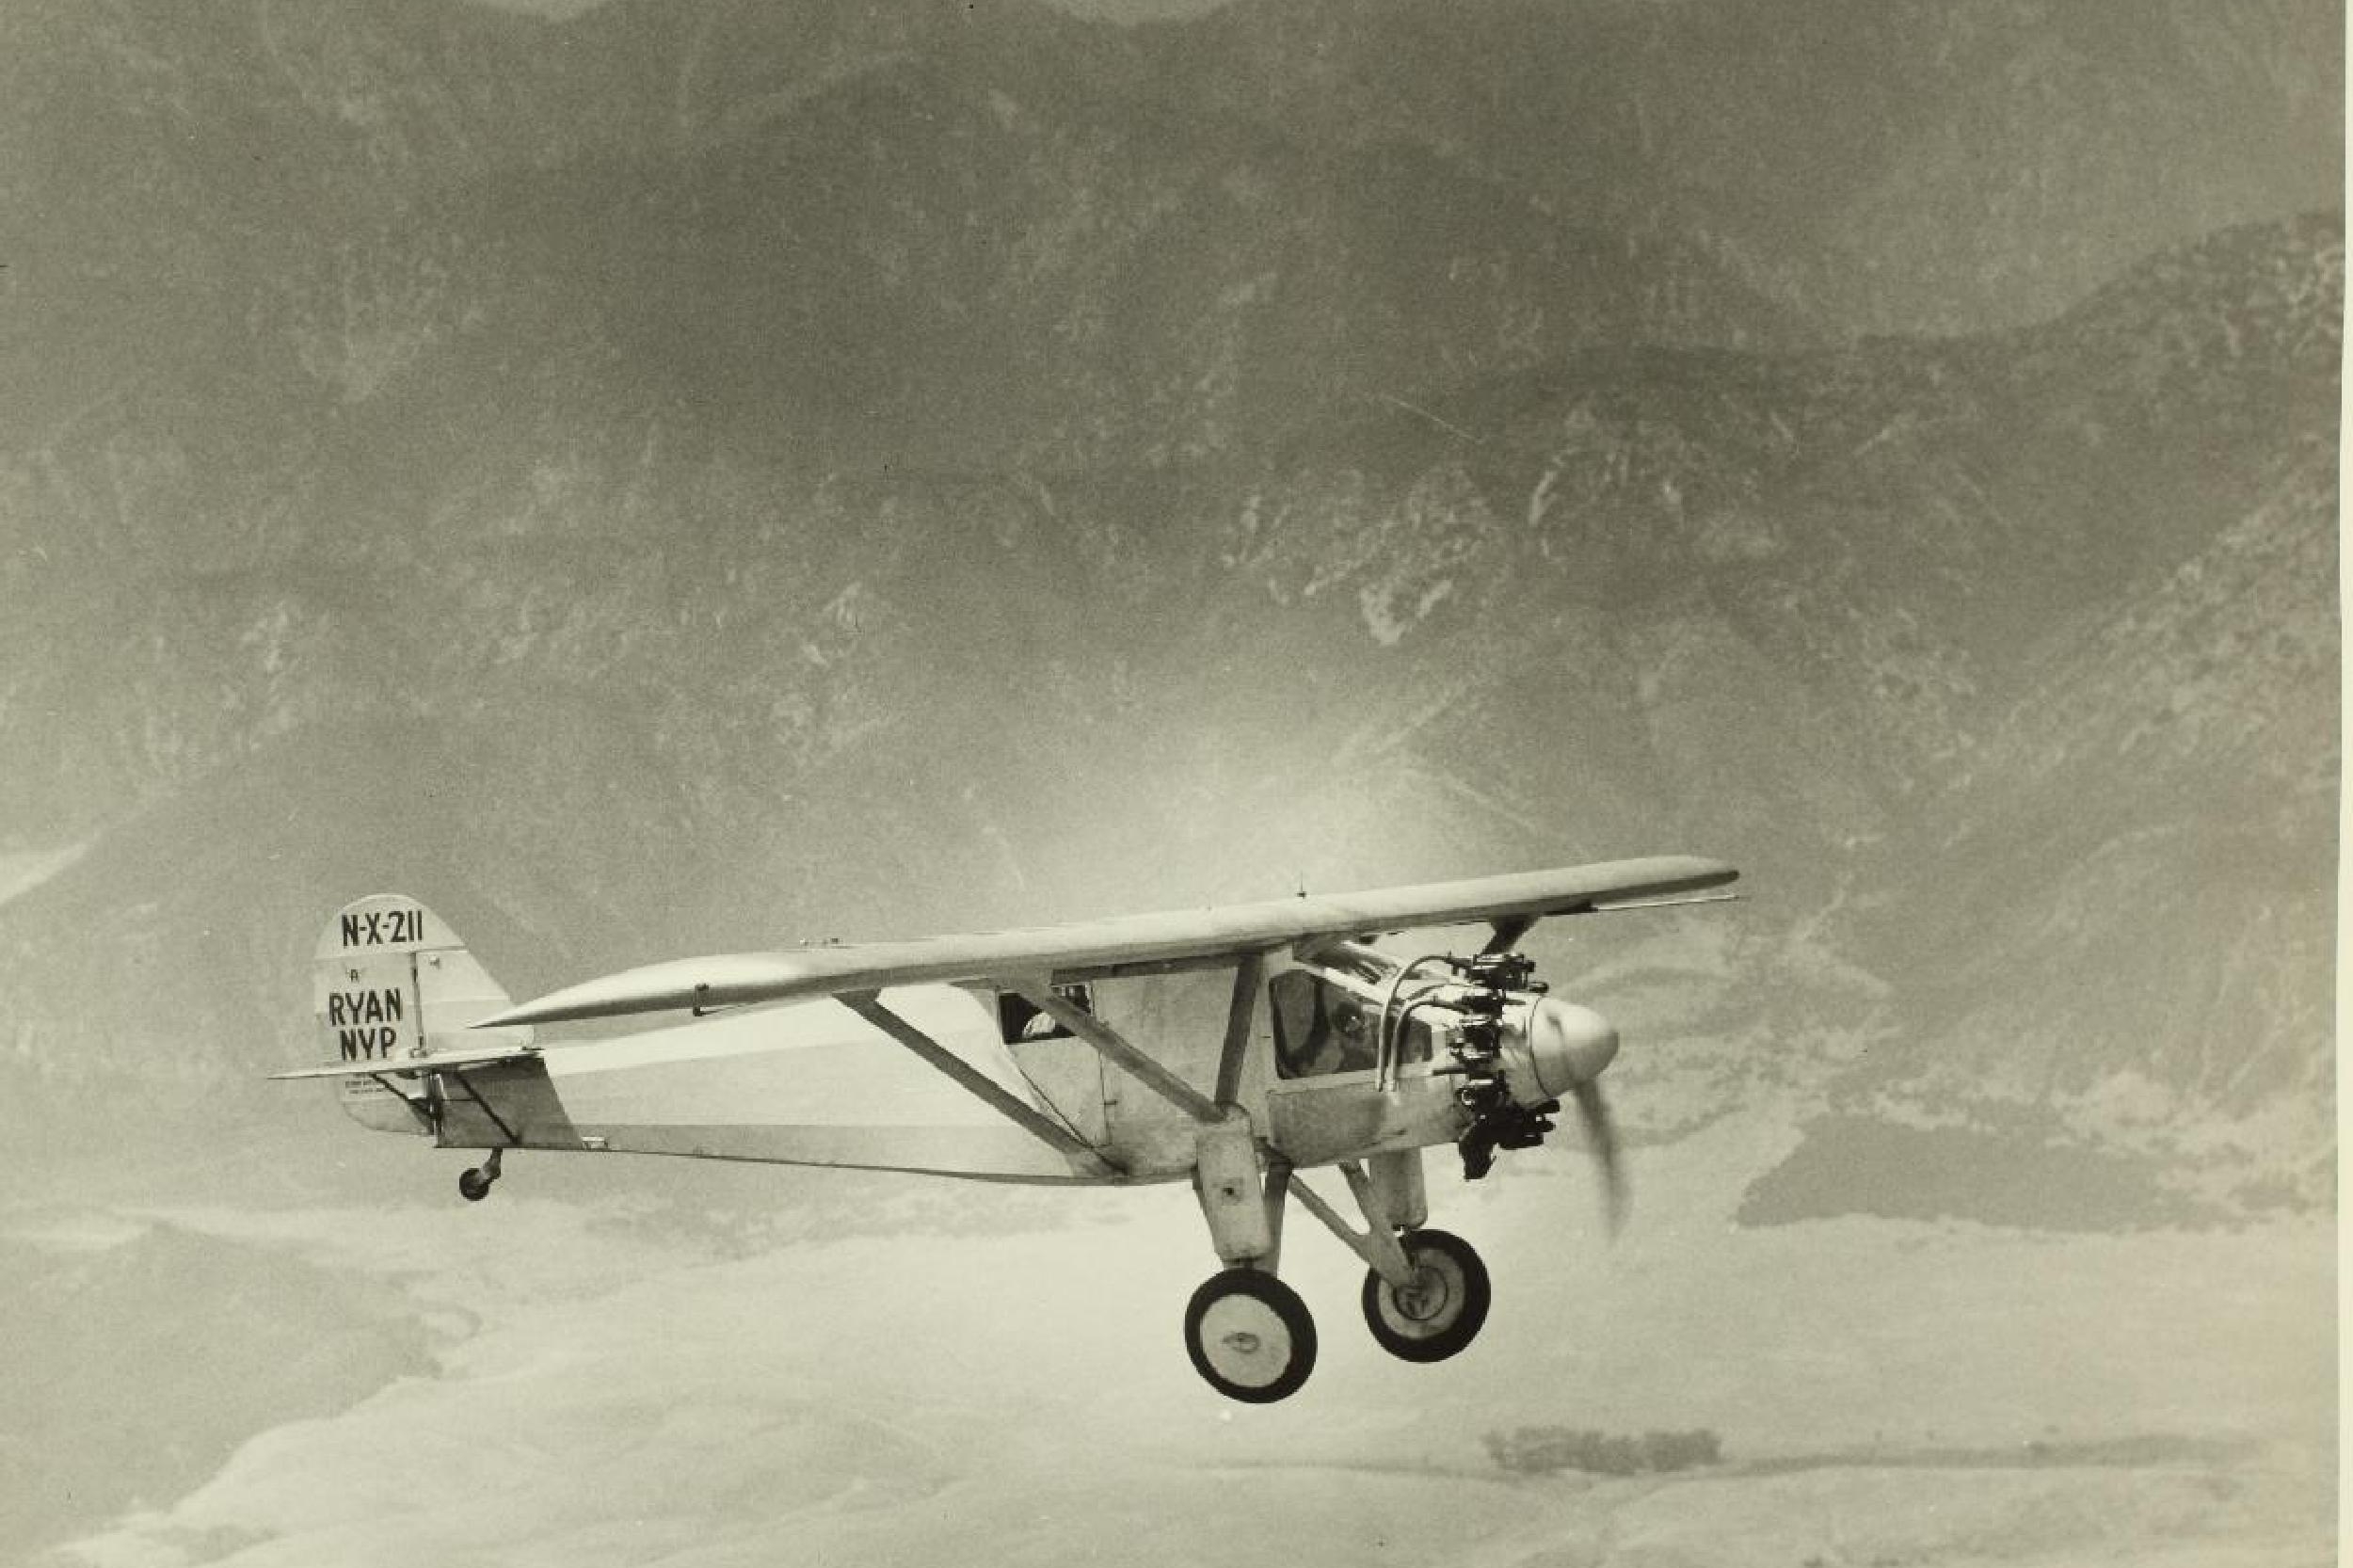 Old airplane flying through the mountains